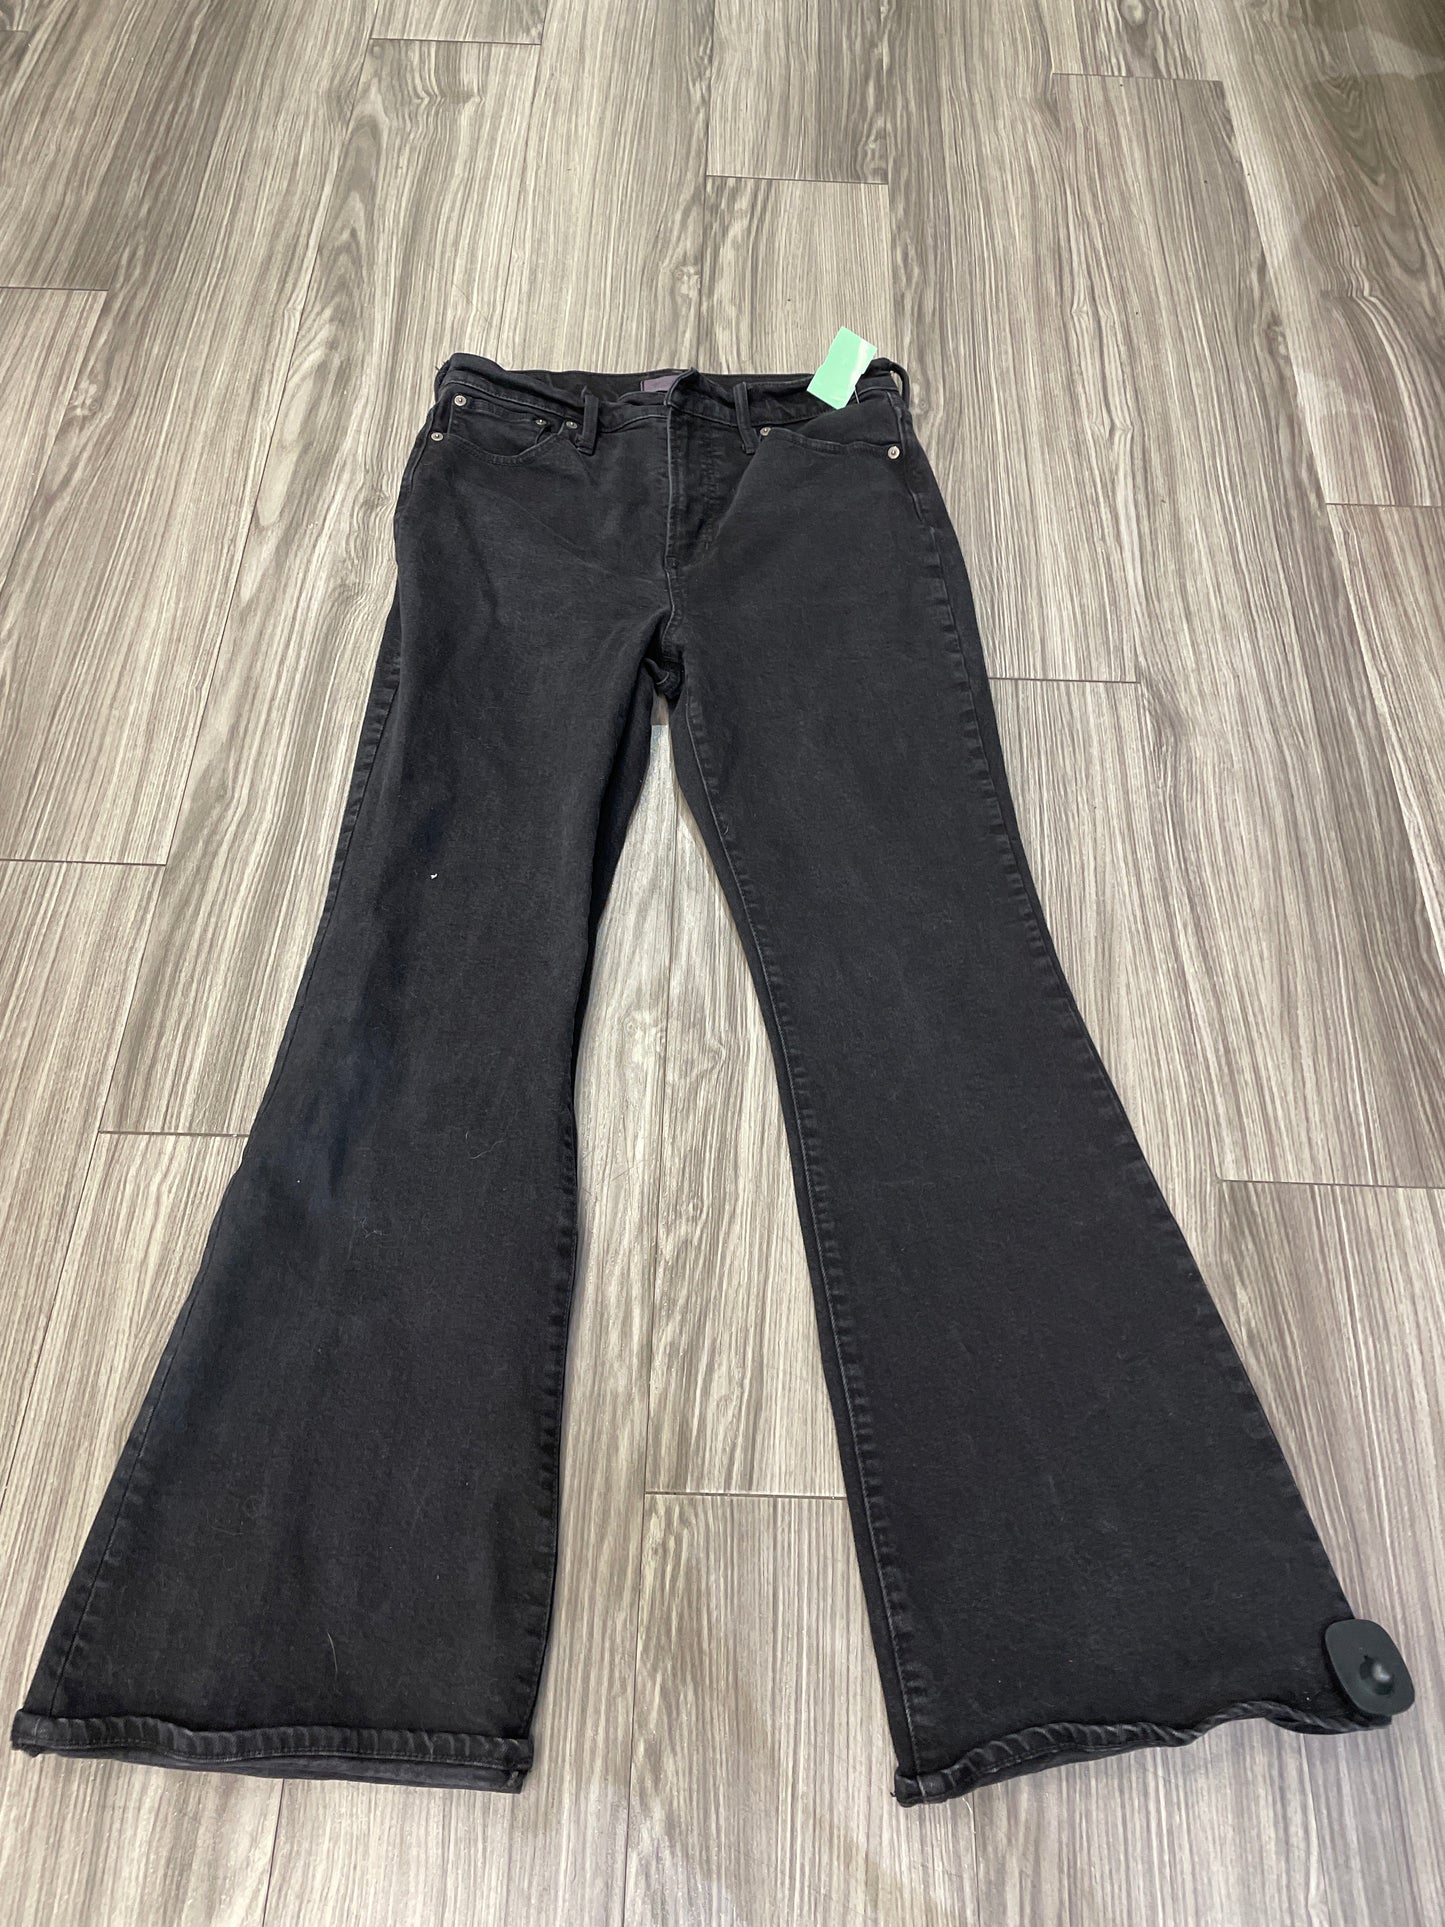 Black Jeans Boot Cut Madewell, Size 8